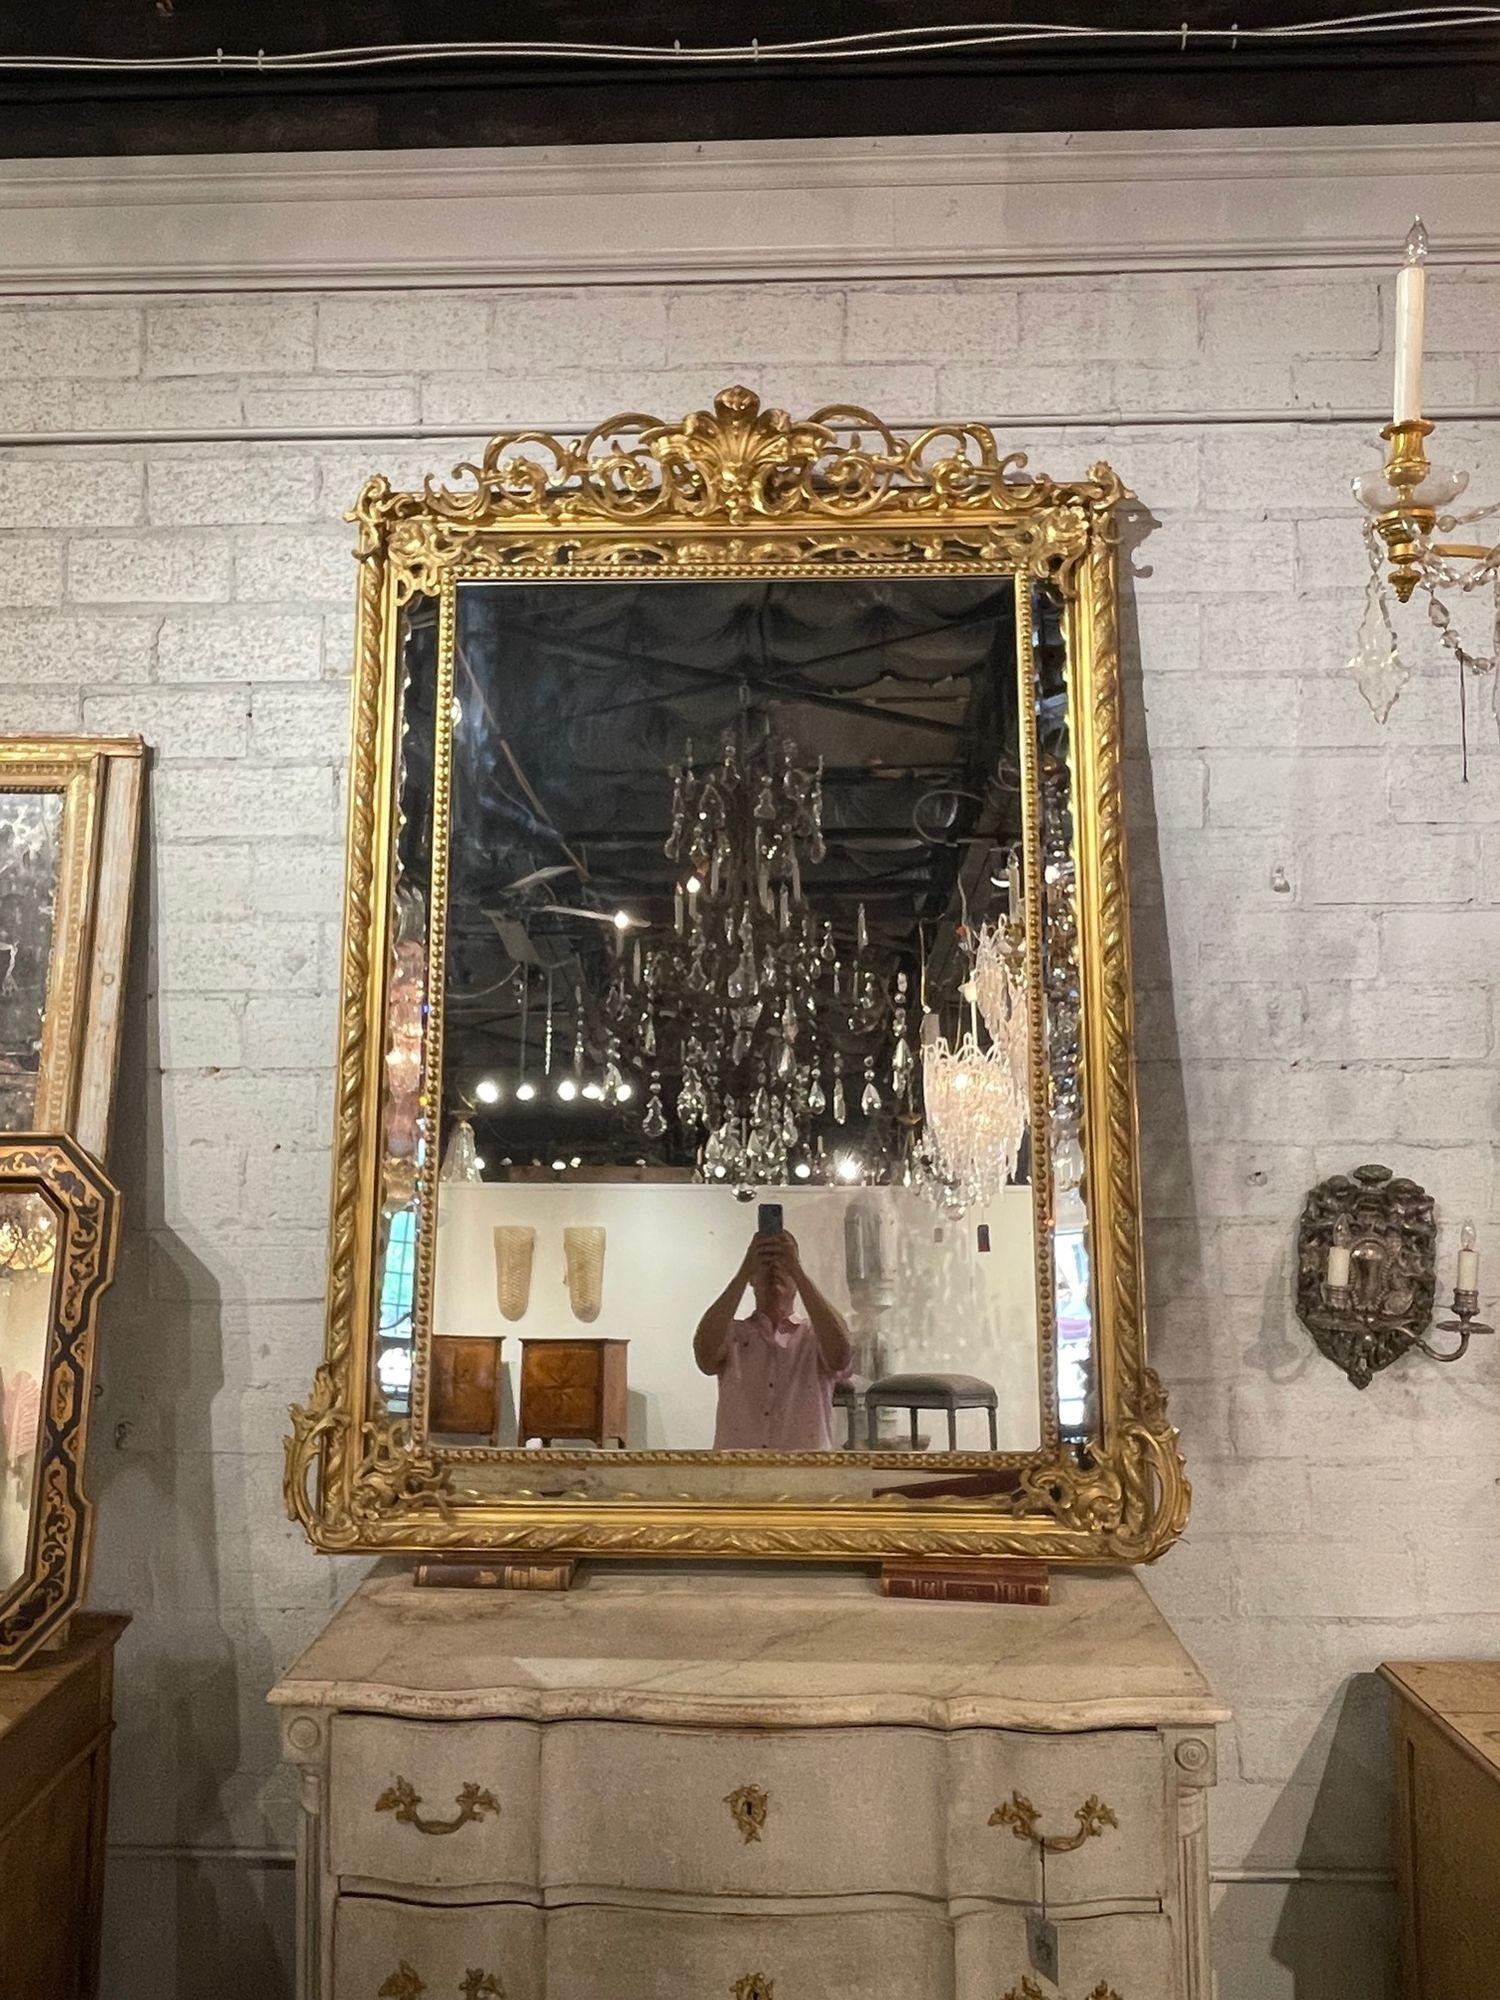 Exquisite 19th century French Louis XV style carved and giltwood cushion mirror. Featuring elaborate carvings including a beautiful crest at the top. A true work of art!!